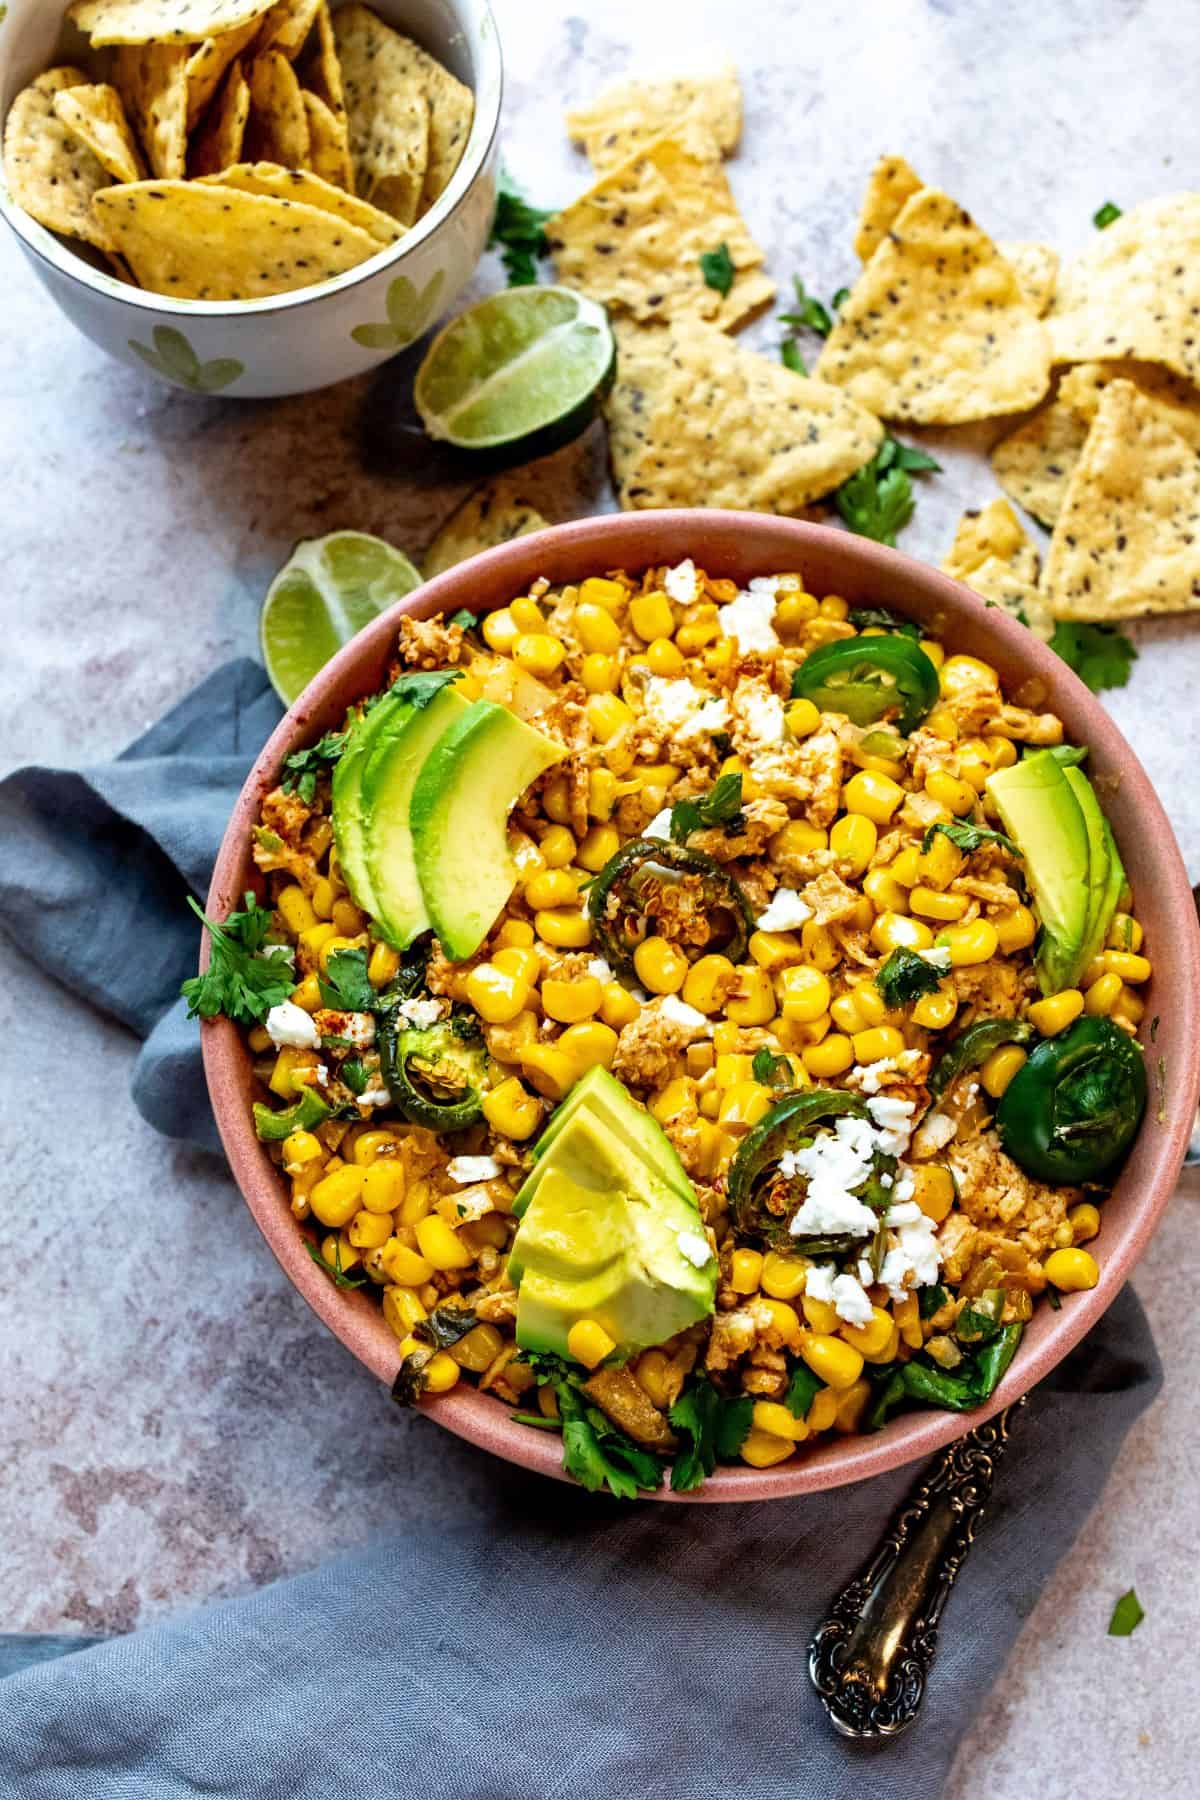 An image of Mexican street corn casserole in a serving bowl.